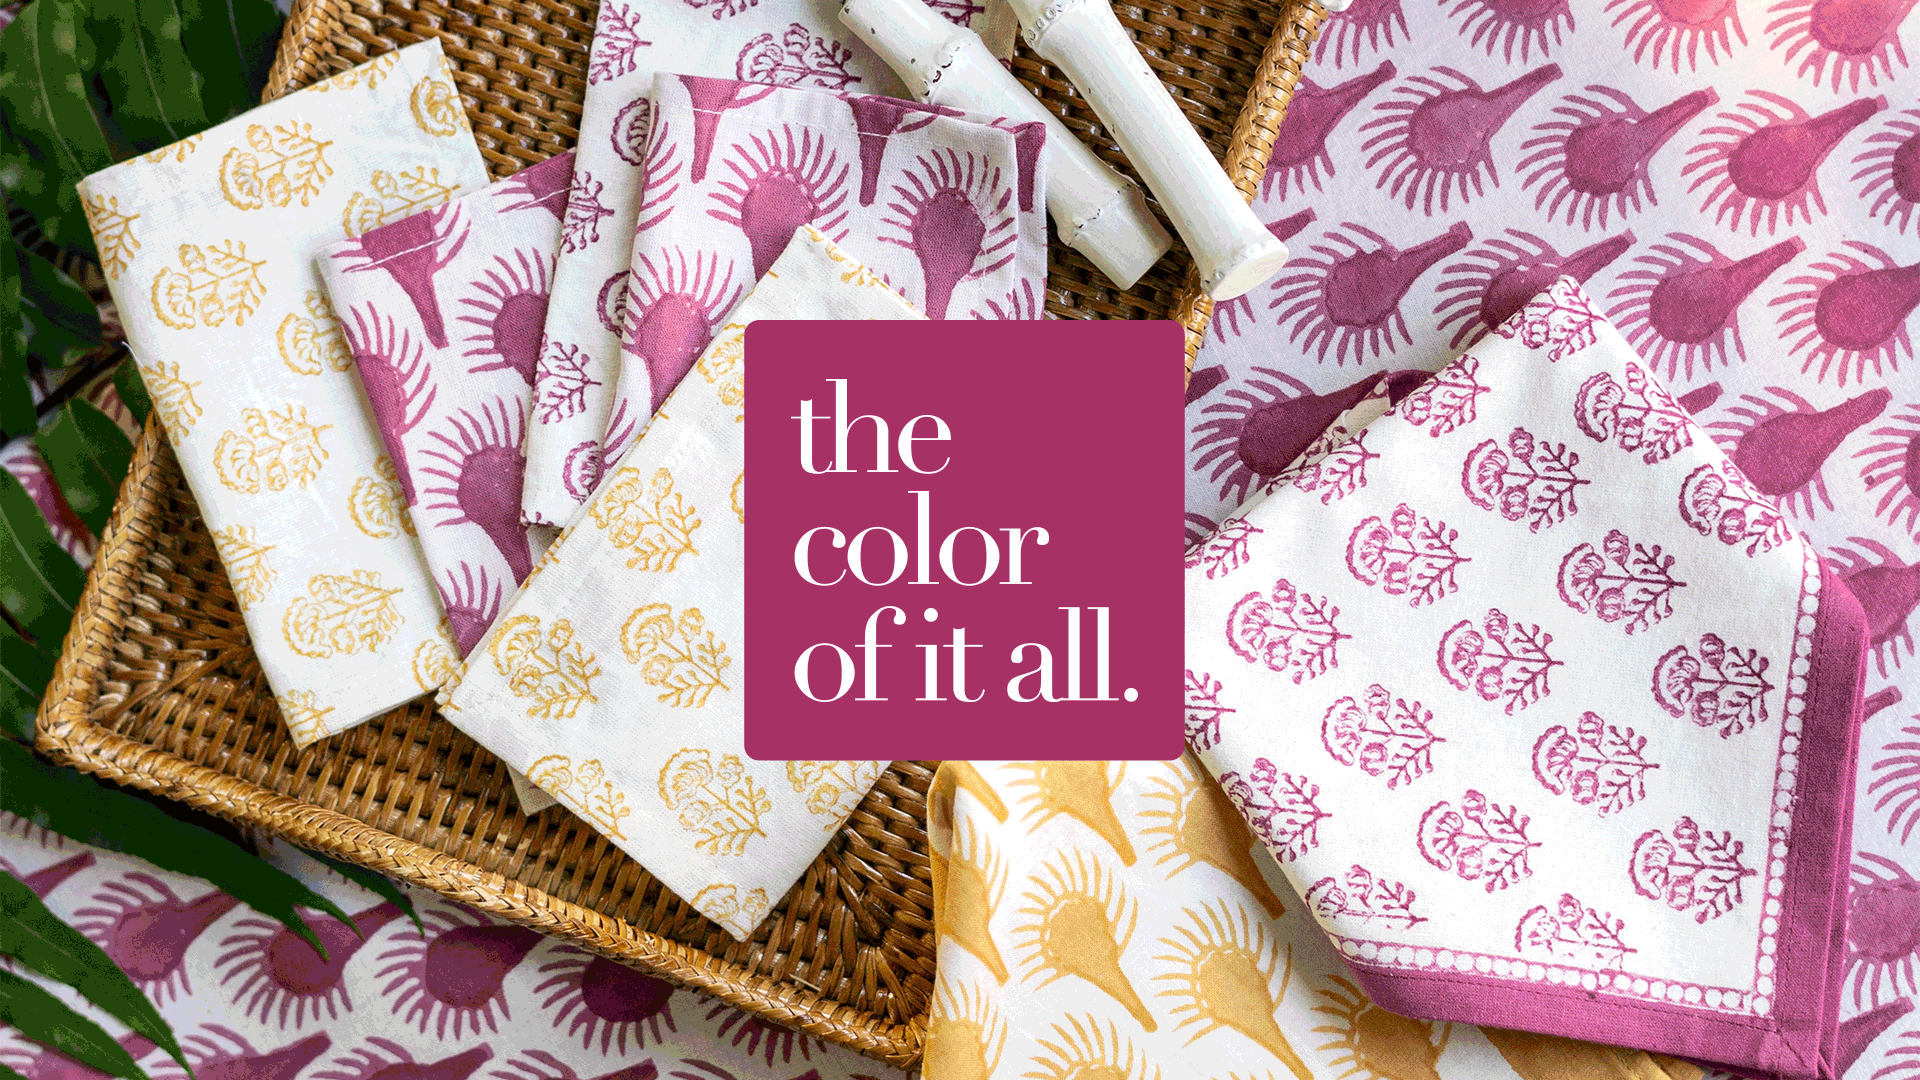 Colorful table linens by Pomegranate